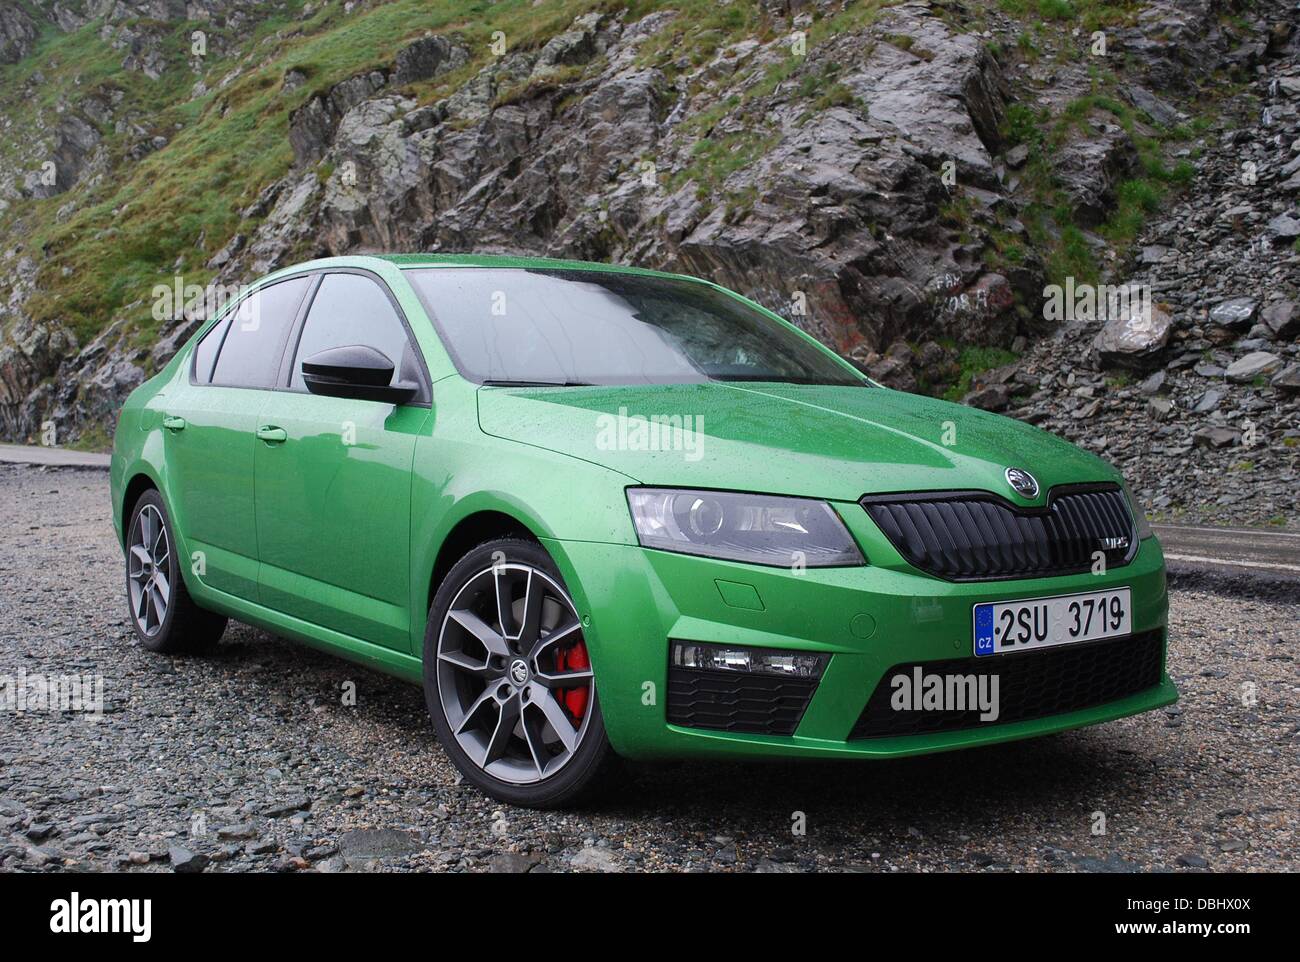 Skoda Octavia RS, one of the fastest and most powerful Octavia model on the  road, was launched in July. Output is 220 hp and top speed is 248 km/h. New Skoda  Octavia